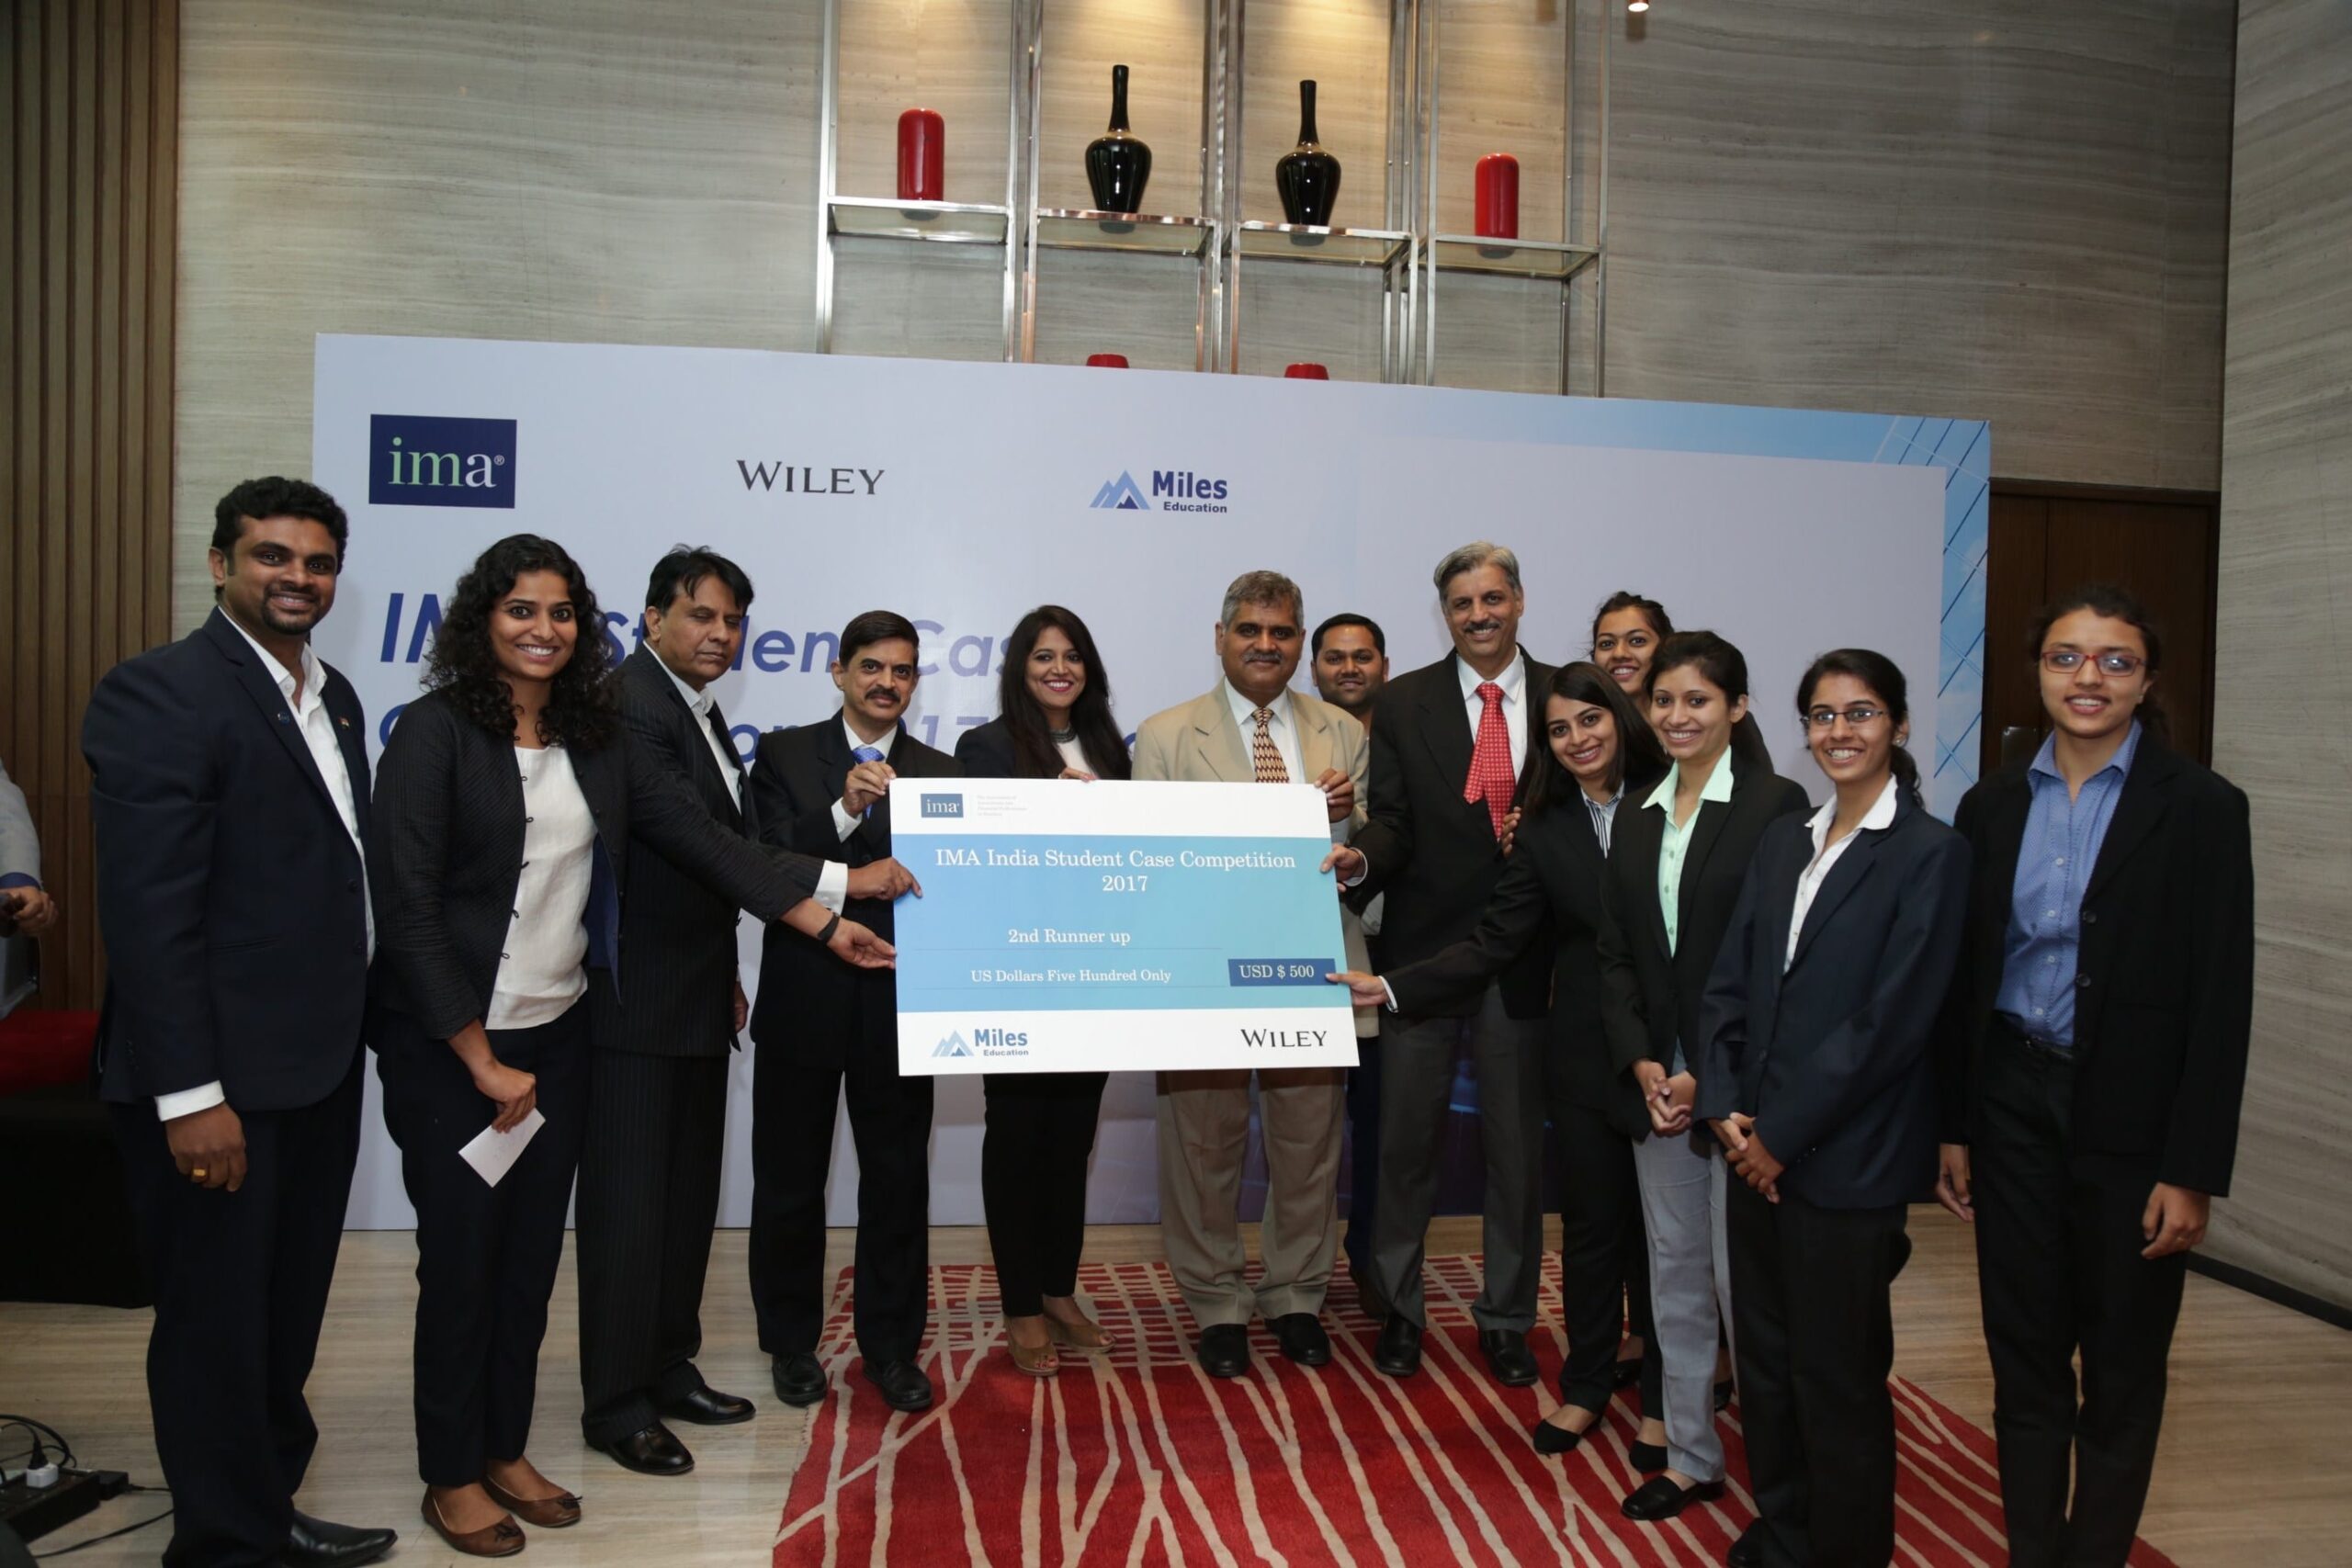 IMA announces student case competition winners in India